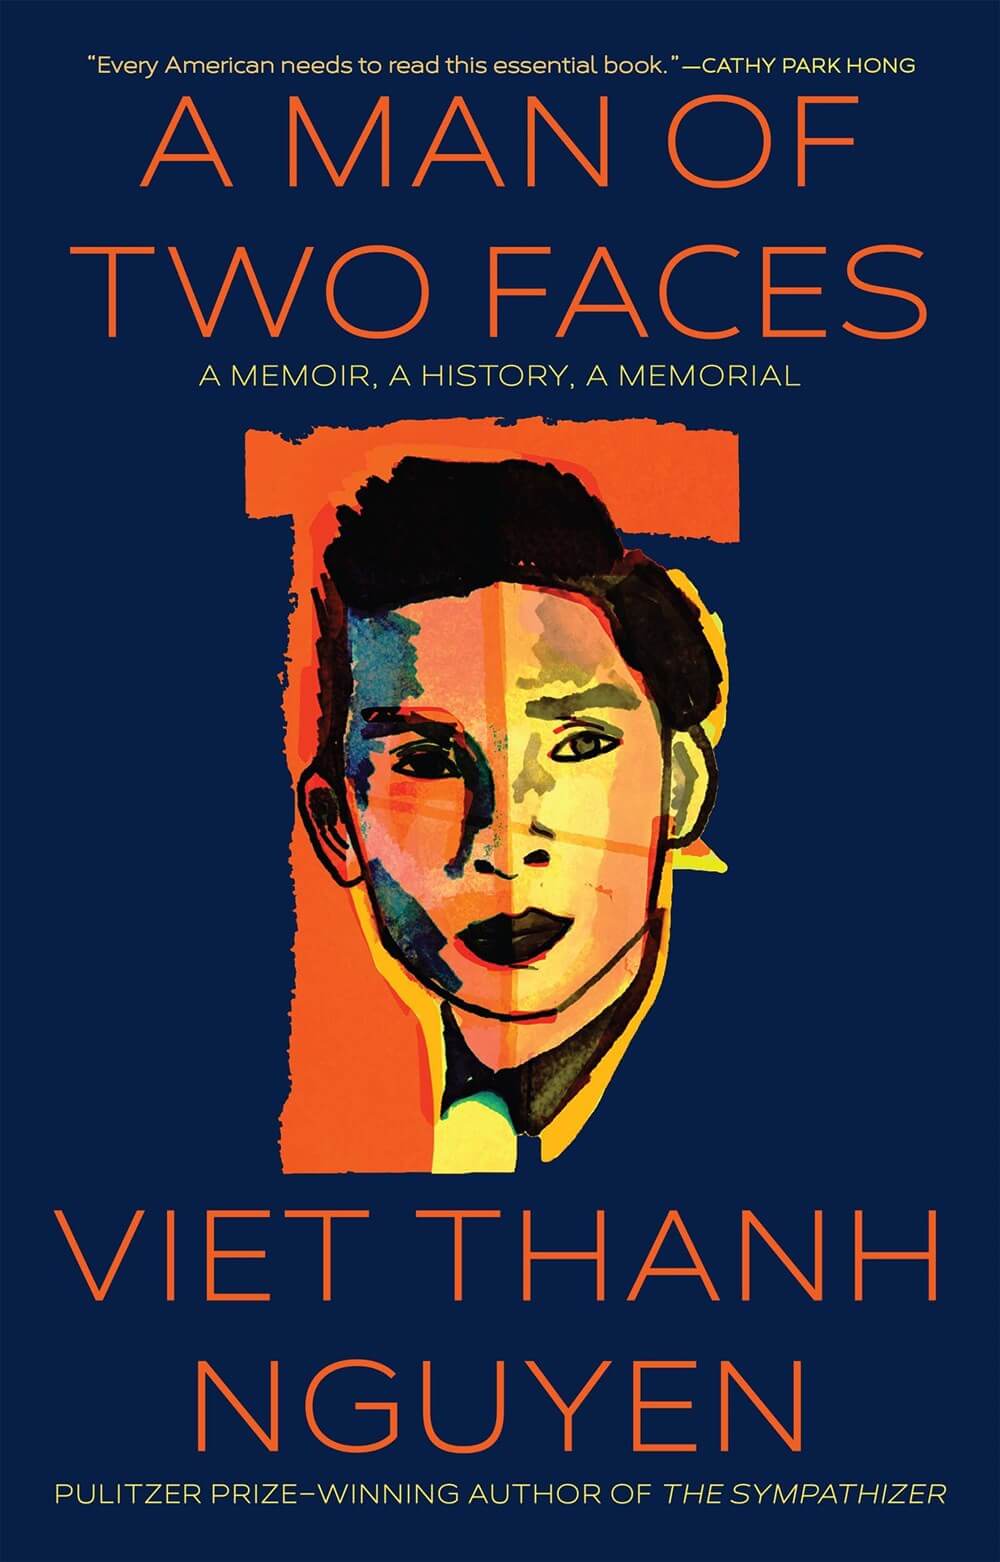 The cover for 'A Man of Two Faces'.